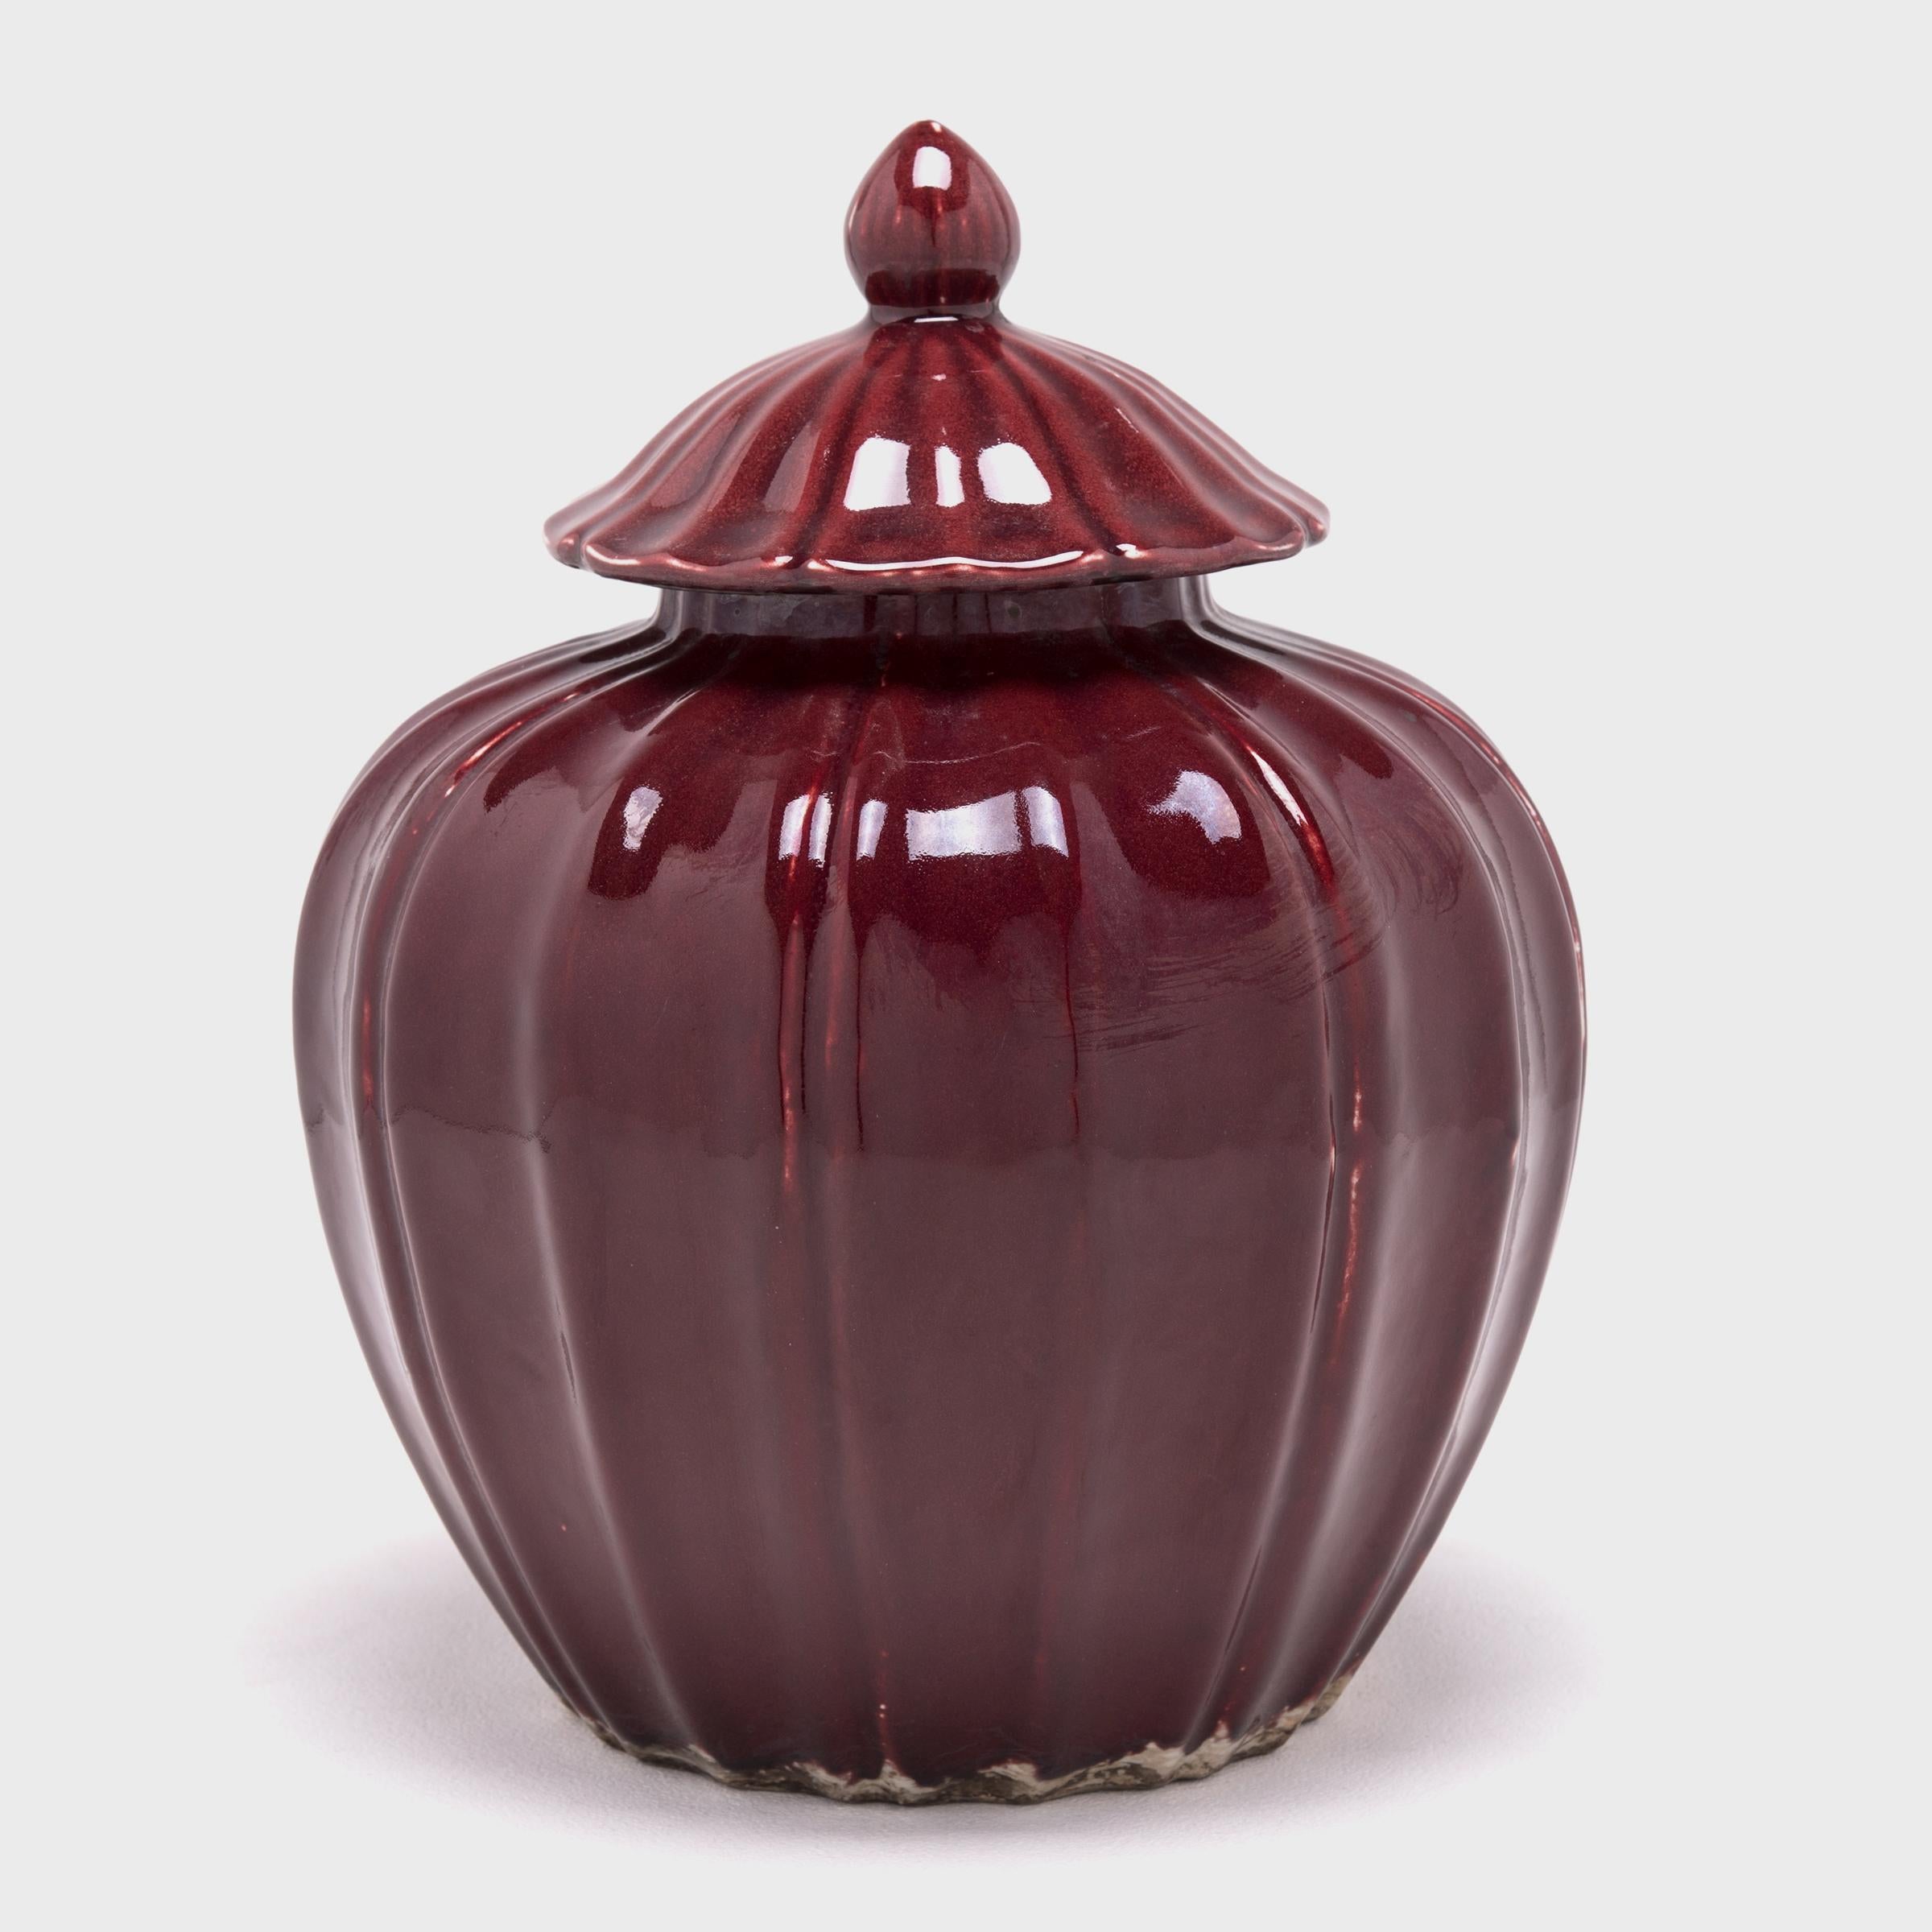 The melon shape is respected by the Chinese not only as a form but as a symbol for proliferation. These contemporary ceramics call back to the Song dynasty when artisans focused their efforts on the art of monochrome glazes. The vase's deep, rich